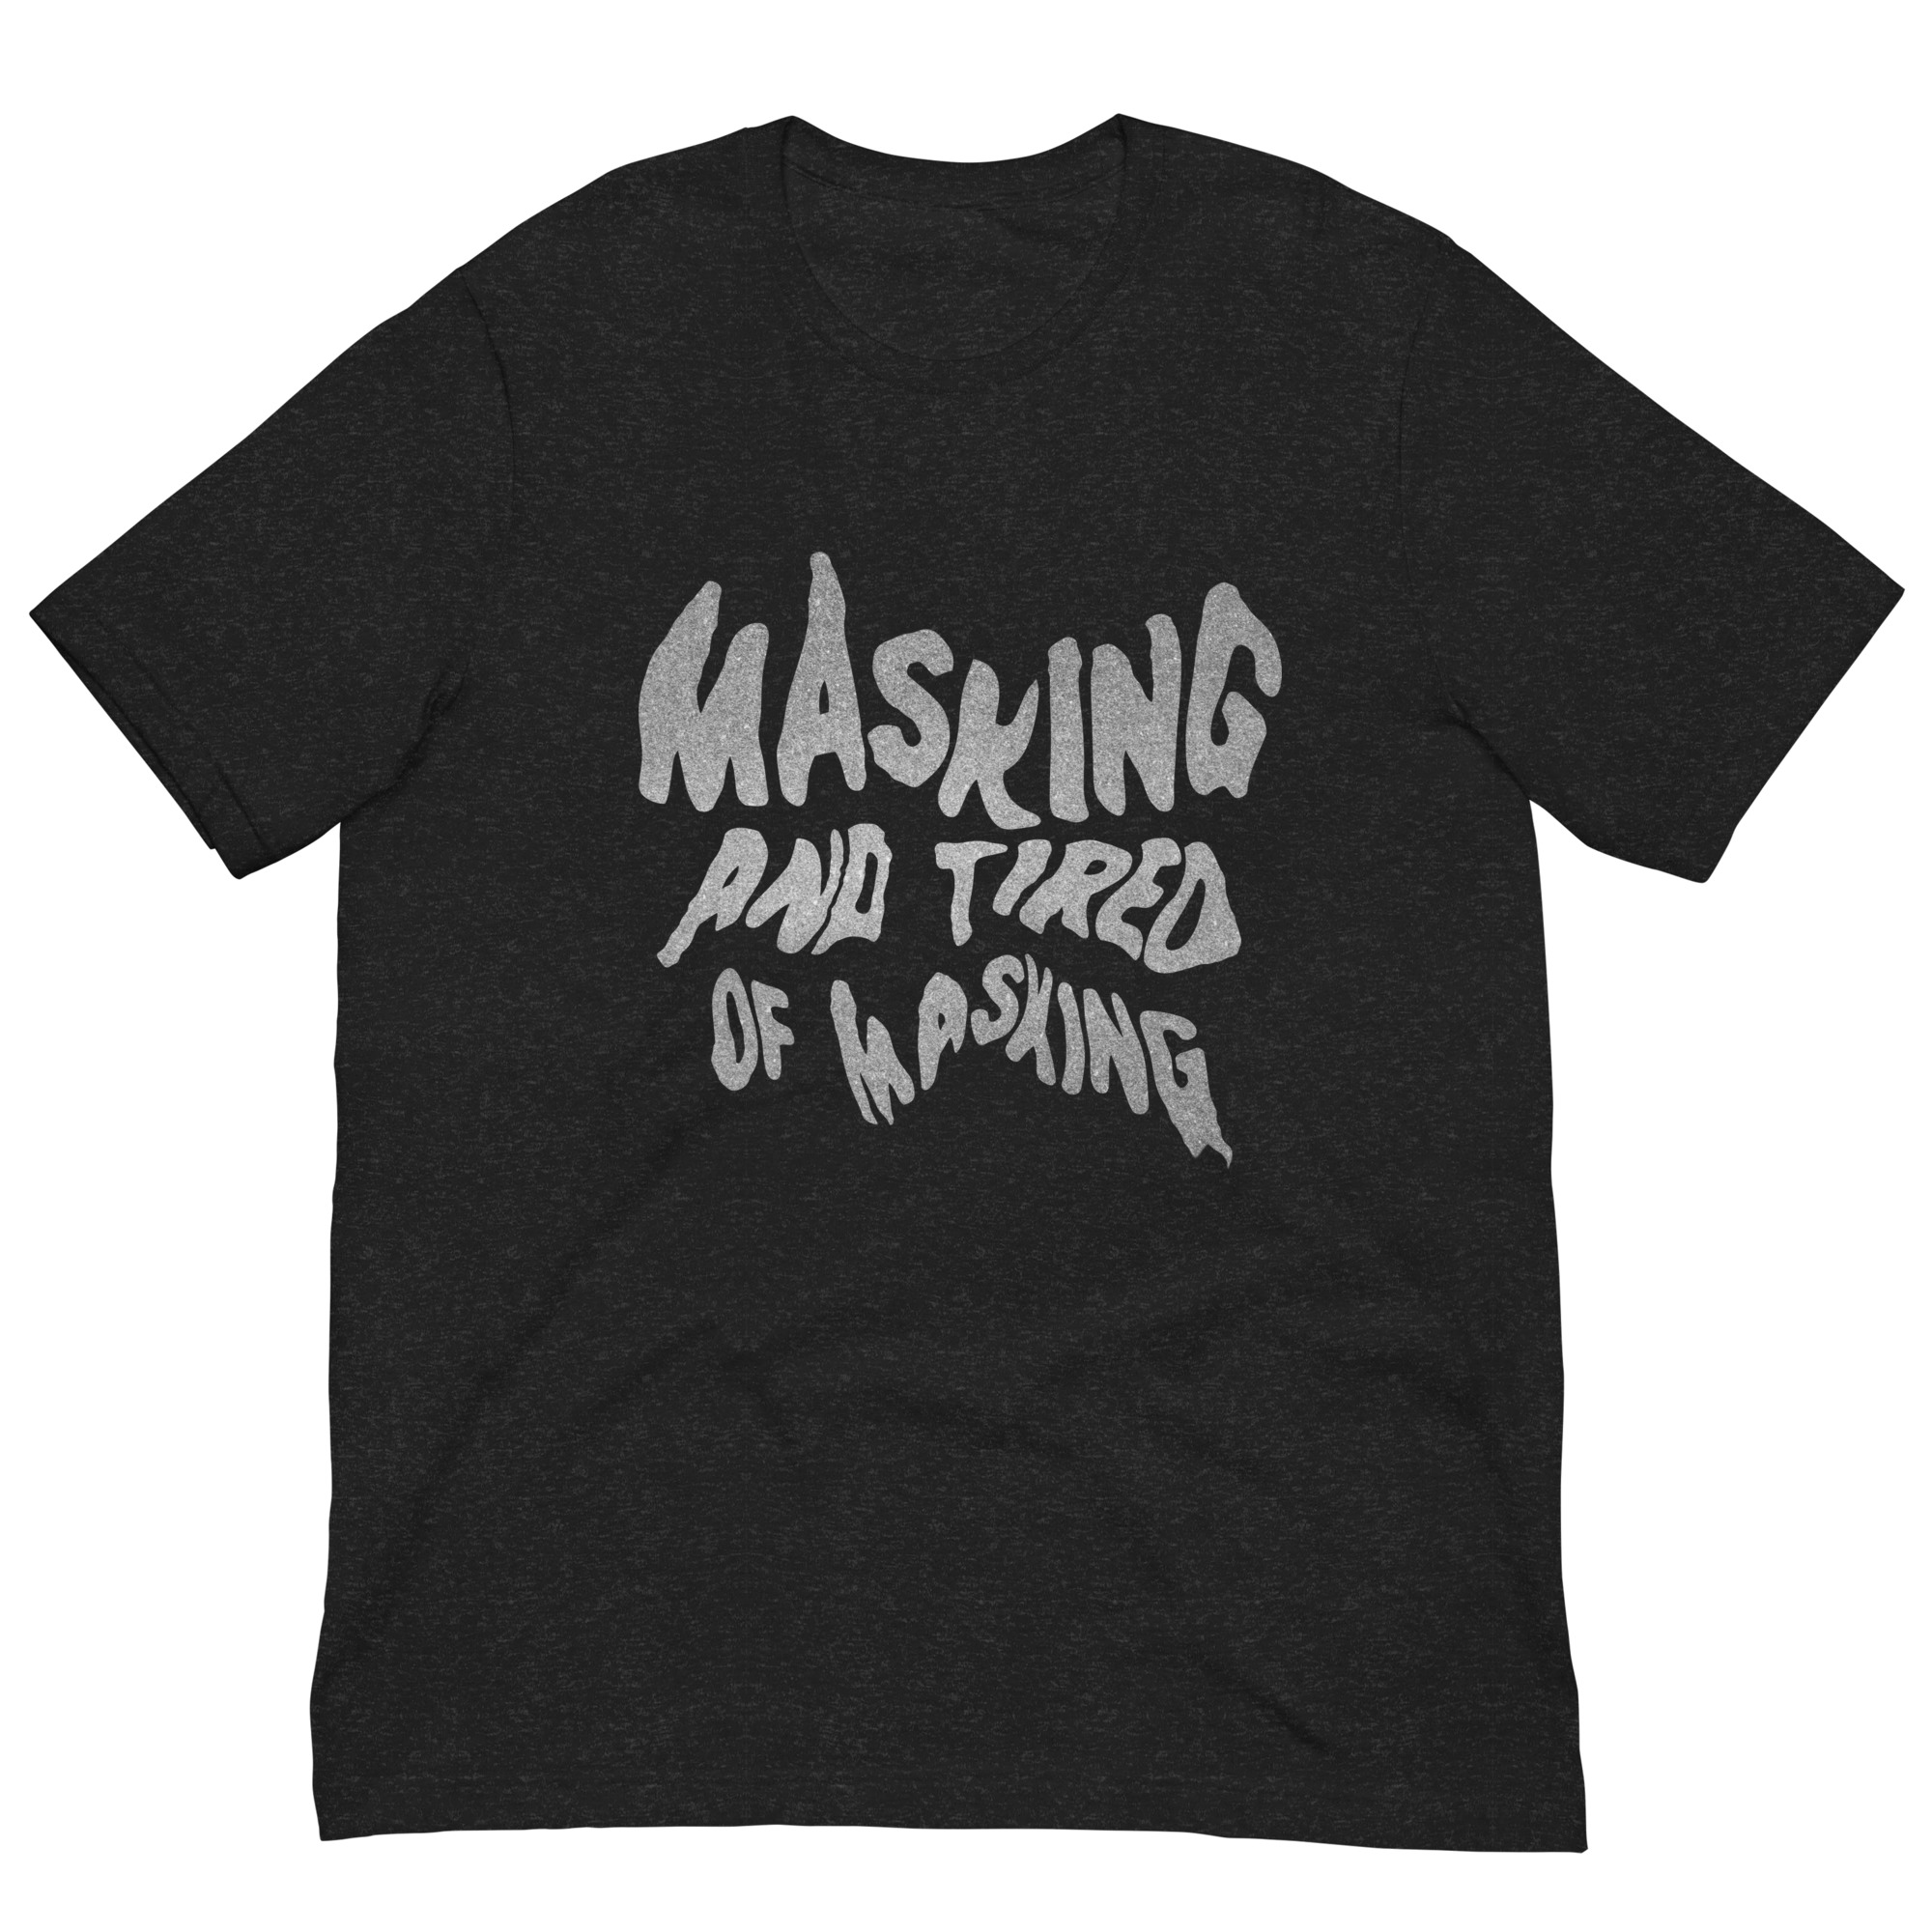 Featured image for “Masking and Tired of masking - Unisex t-shirt”